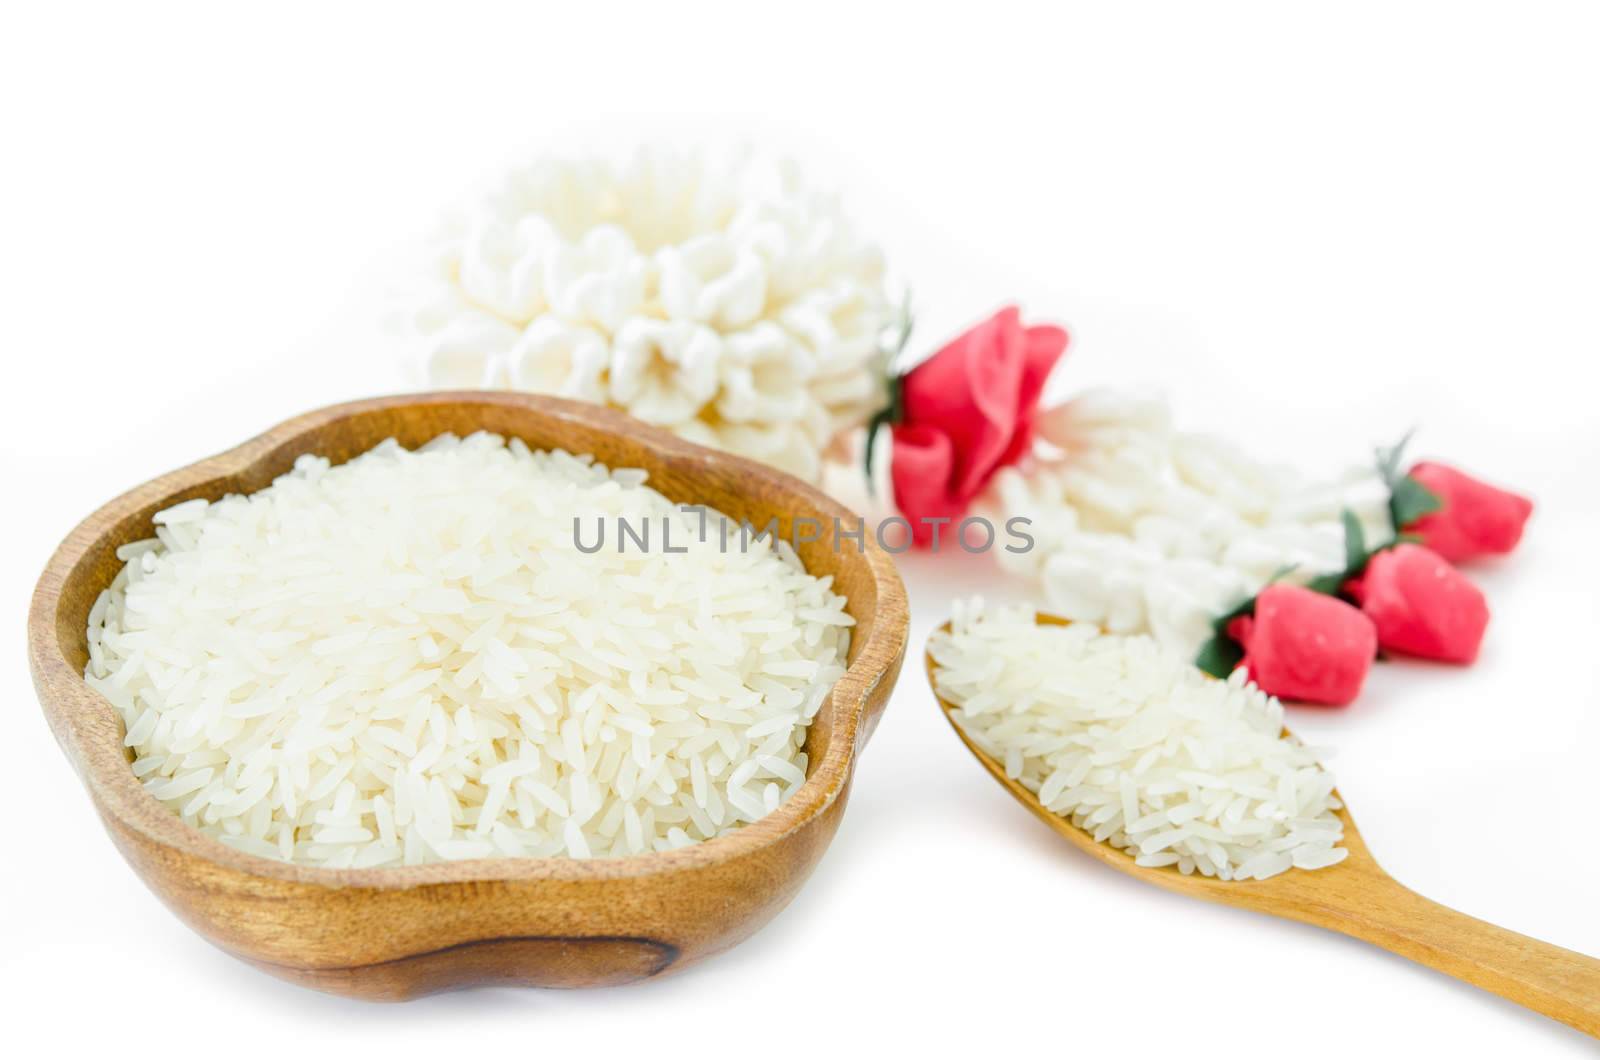 Raw white rice from Thailand by Gamjai